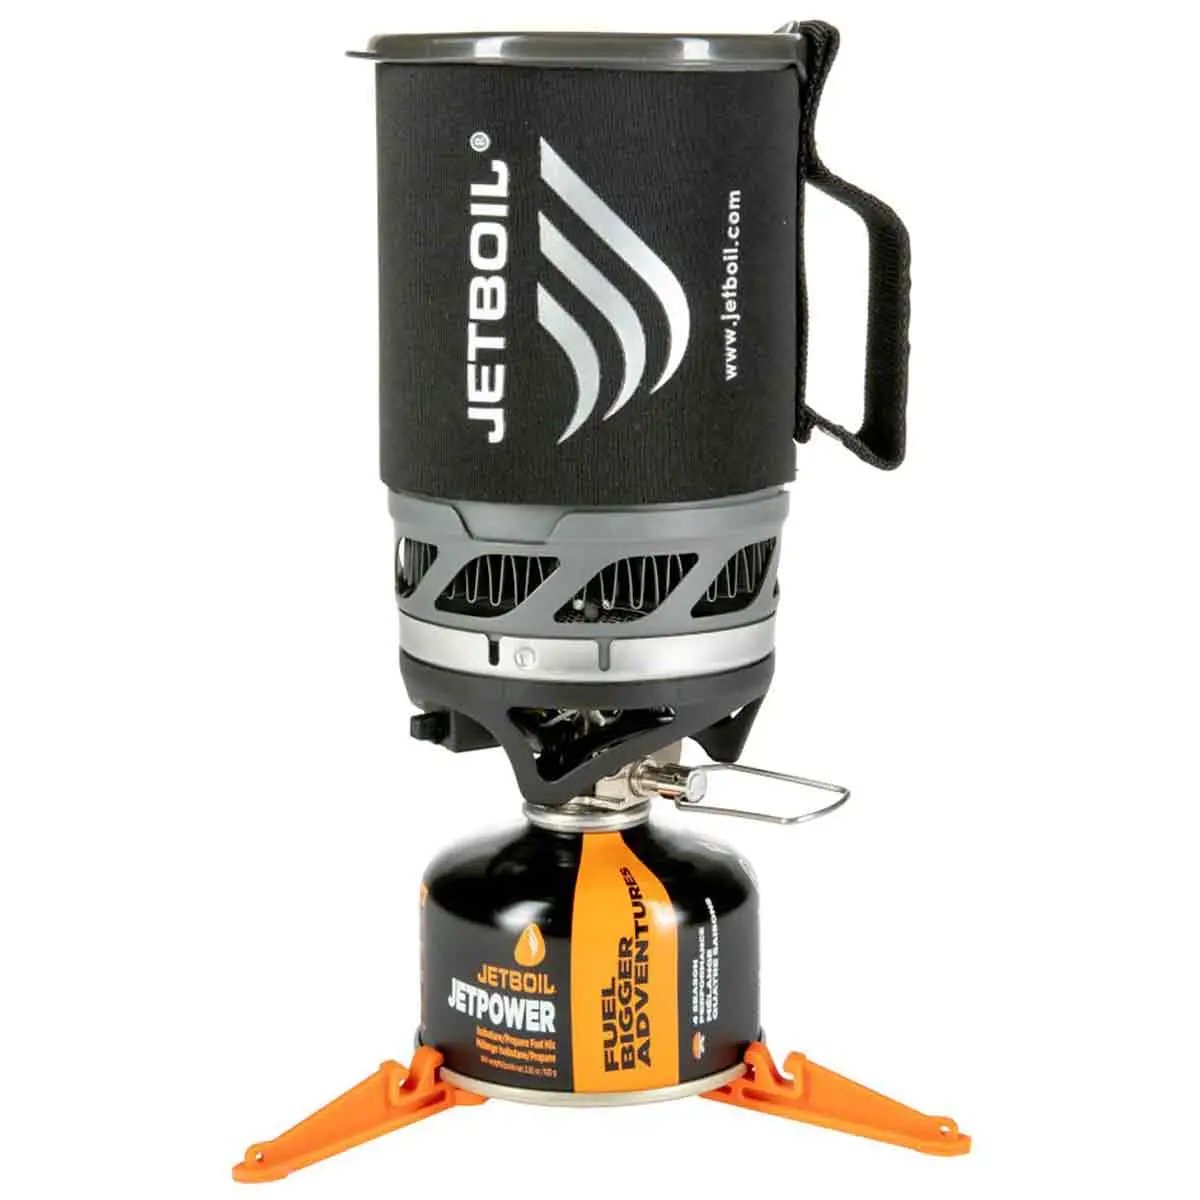 Jetboil MicroMo Carbon MCMCB Cooking Stove - John Bull Clothing